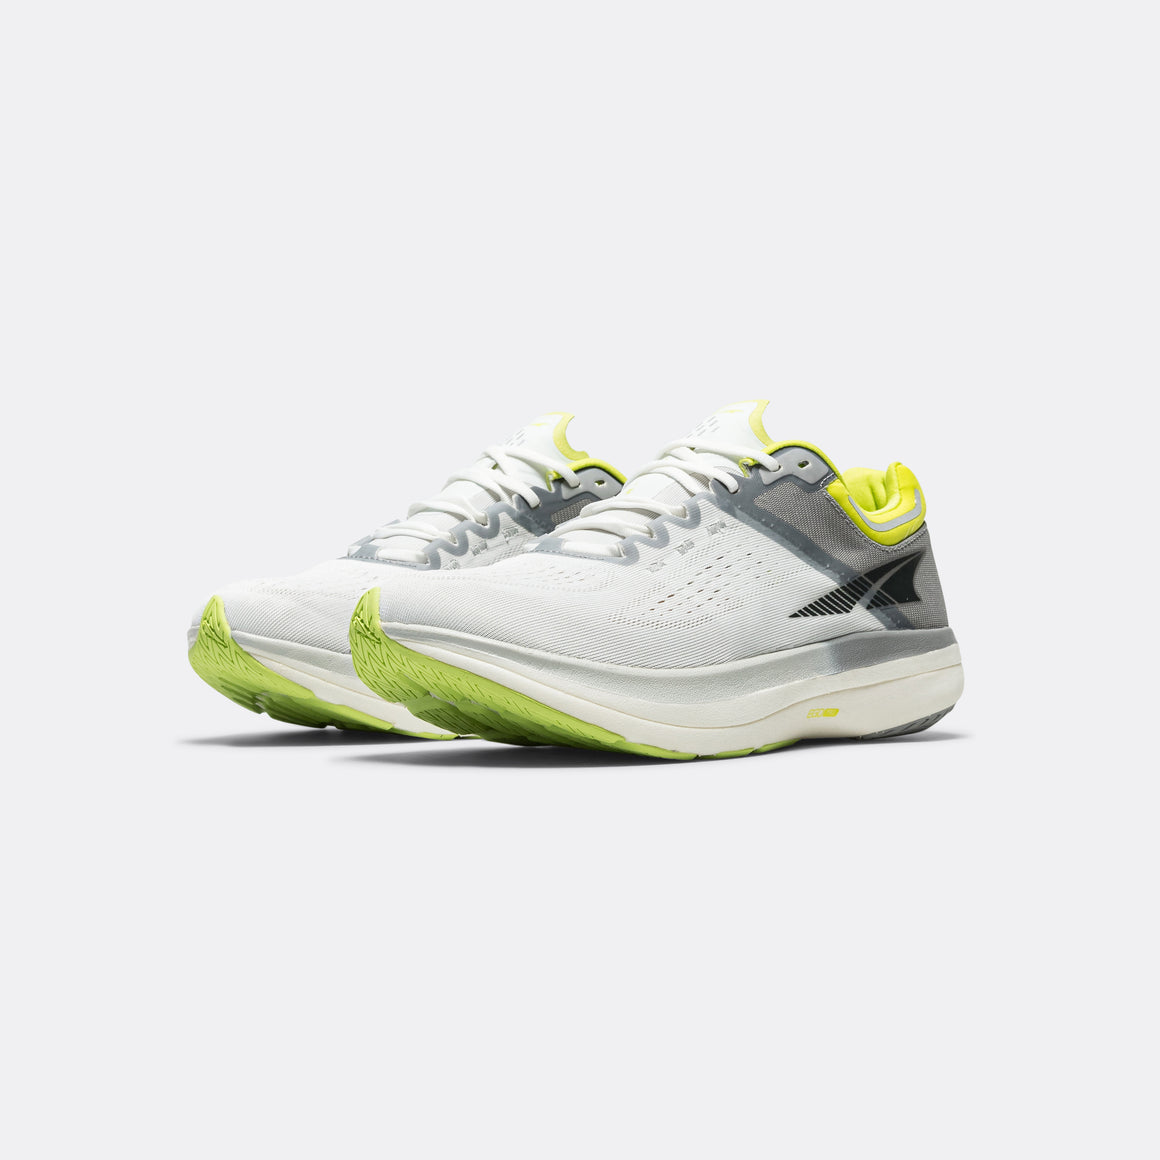 Altra - Mens Vanish Tempo - Grey/Lime - Up There Athletics